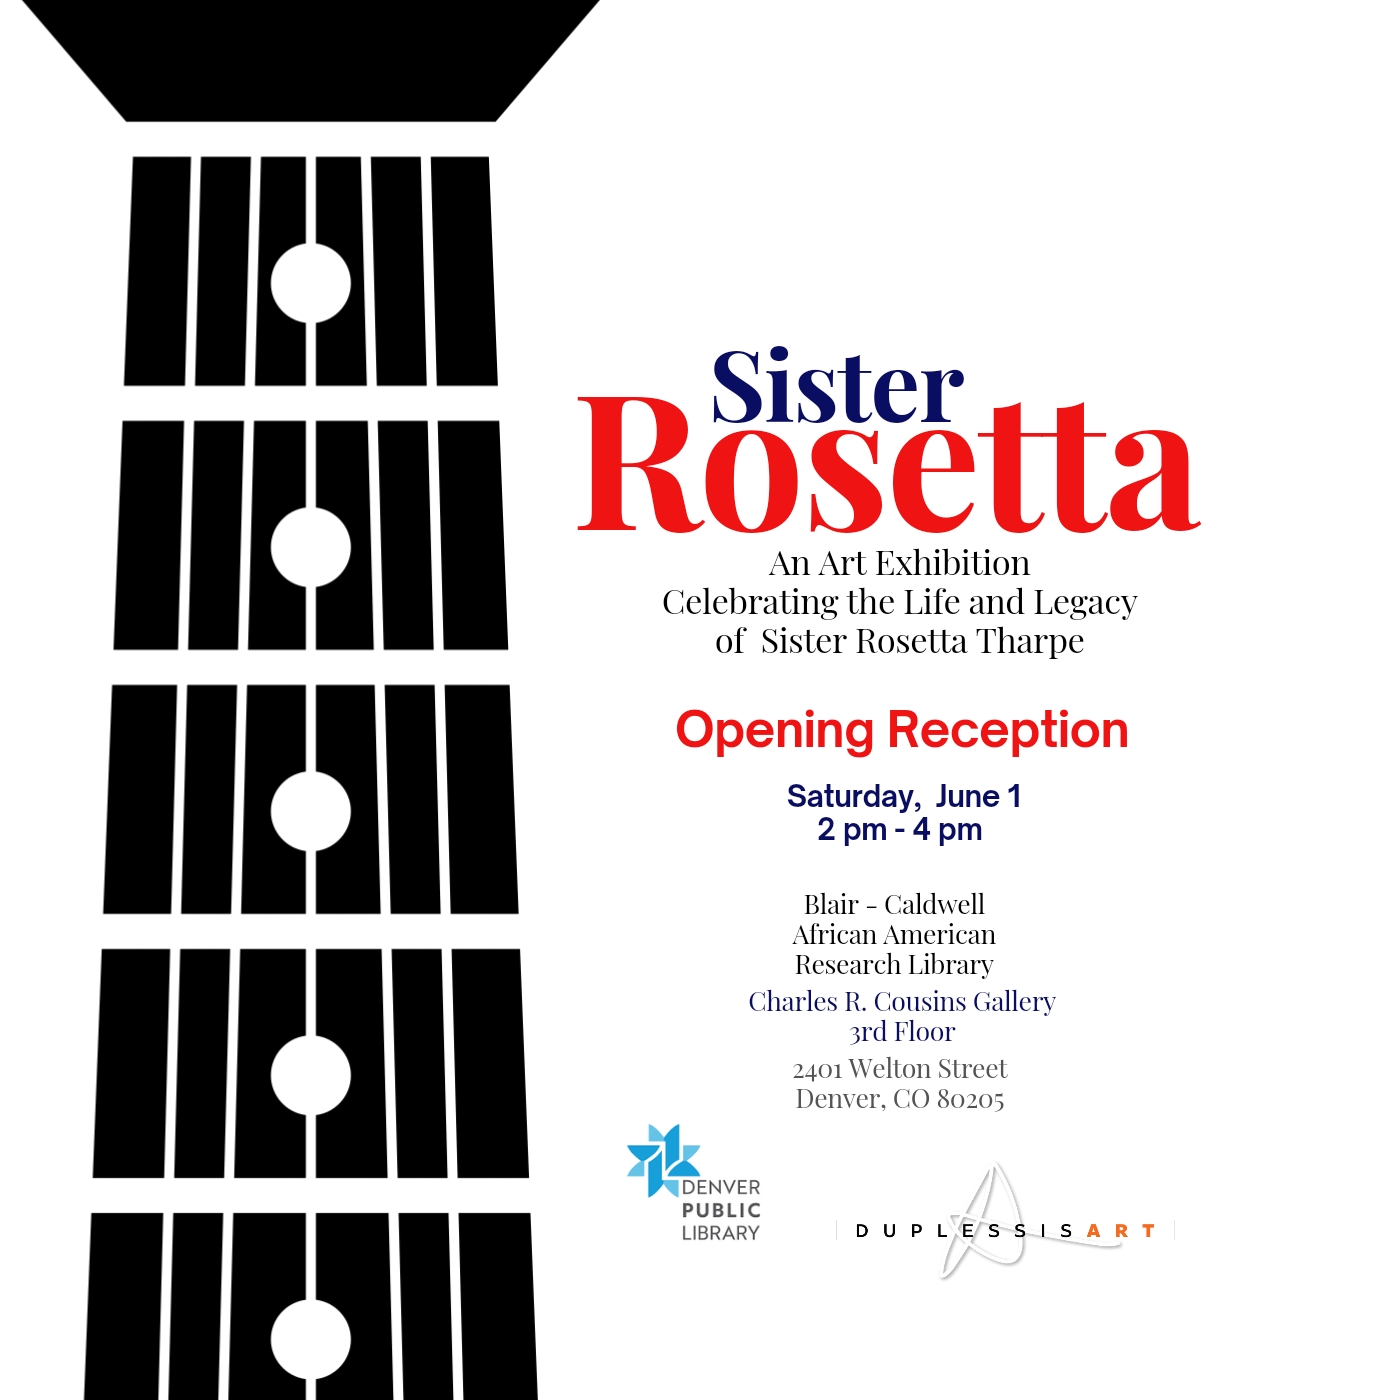 image of a guitar with text announcing art exhibition called "Sister Rosetta"